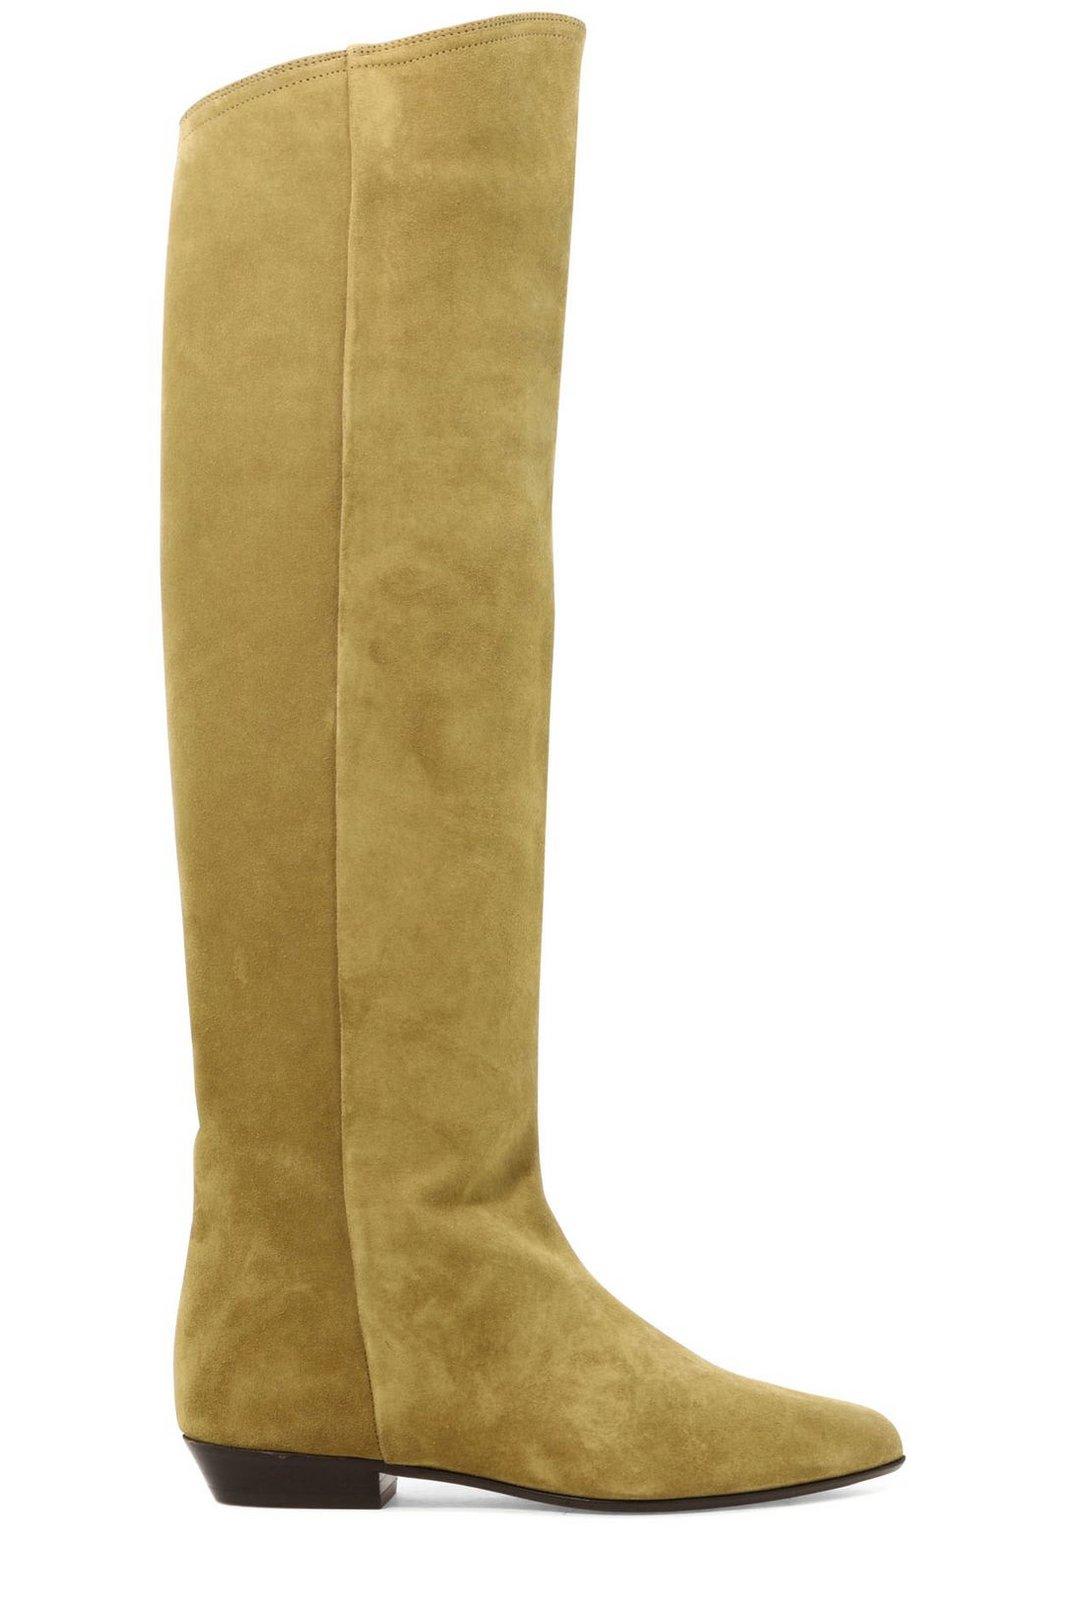 ISABEL MARANT POINTED TOE CITY BOOTS